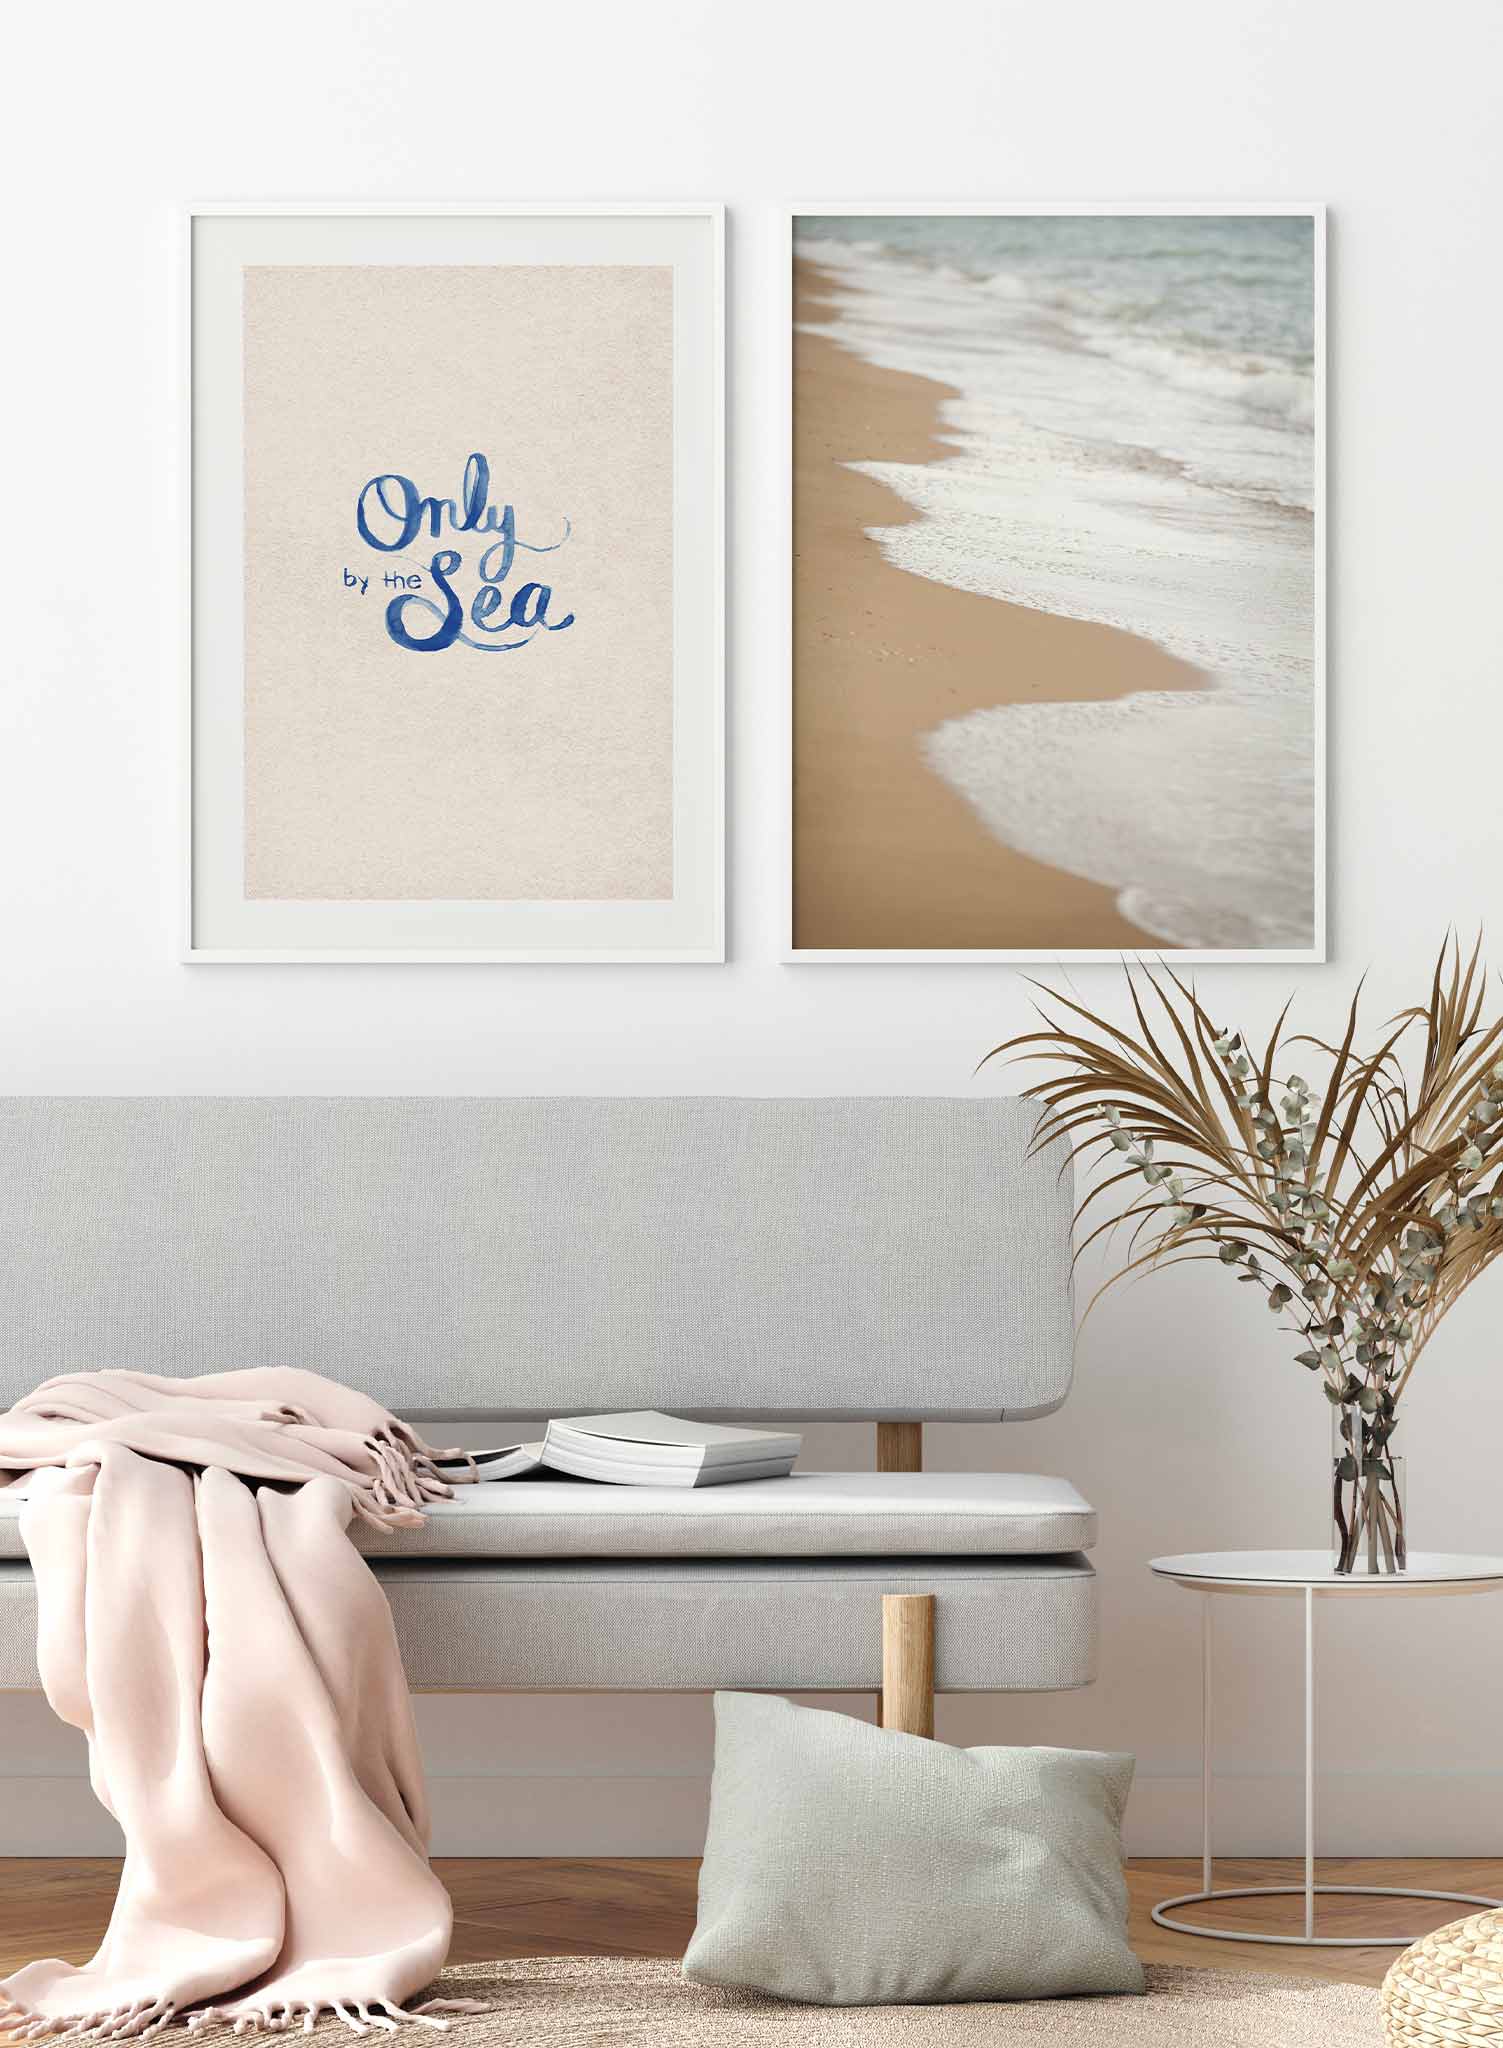 Seaside Living is a minimalist typography of the words 'Only by the sea' written in a calligraphy style by Opposite Wall.